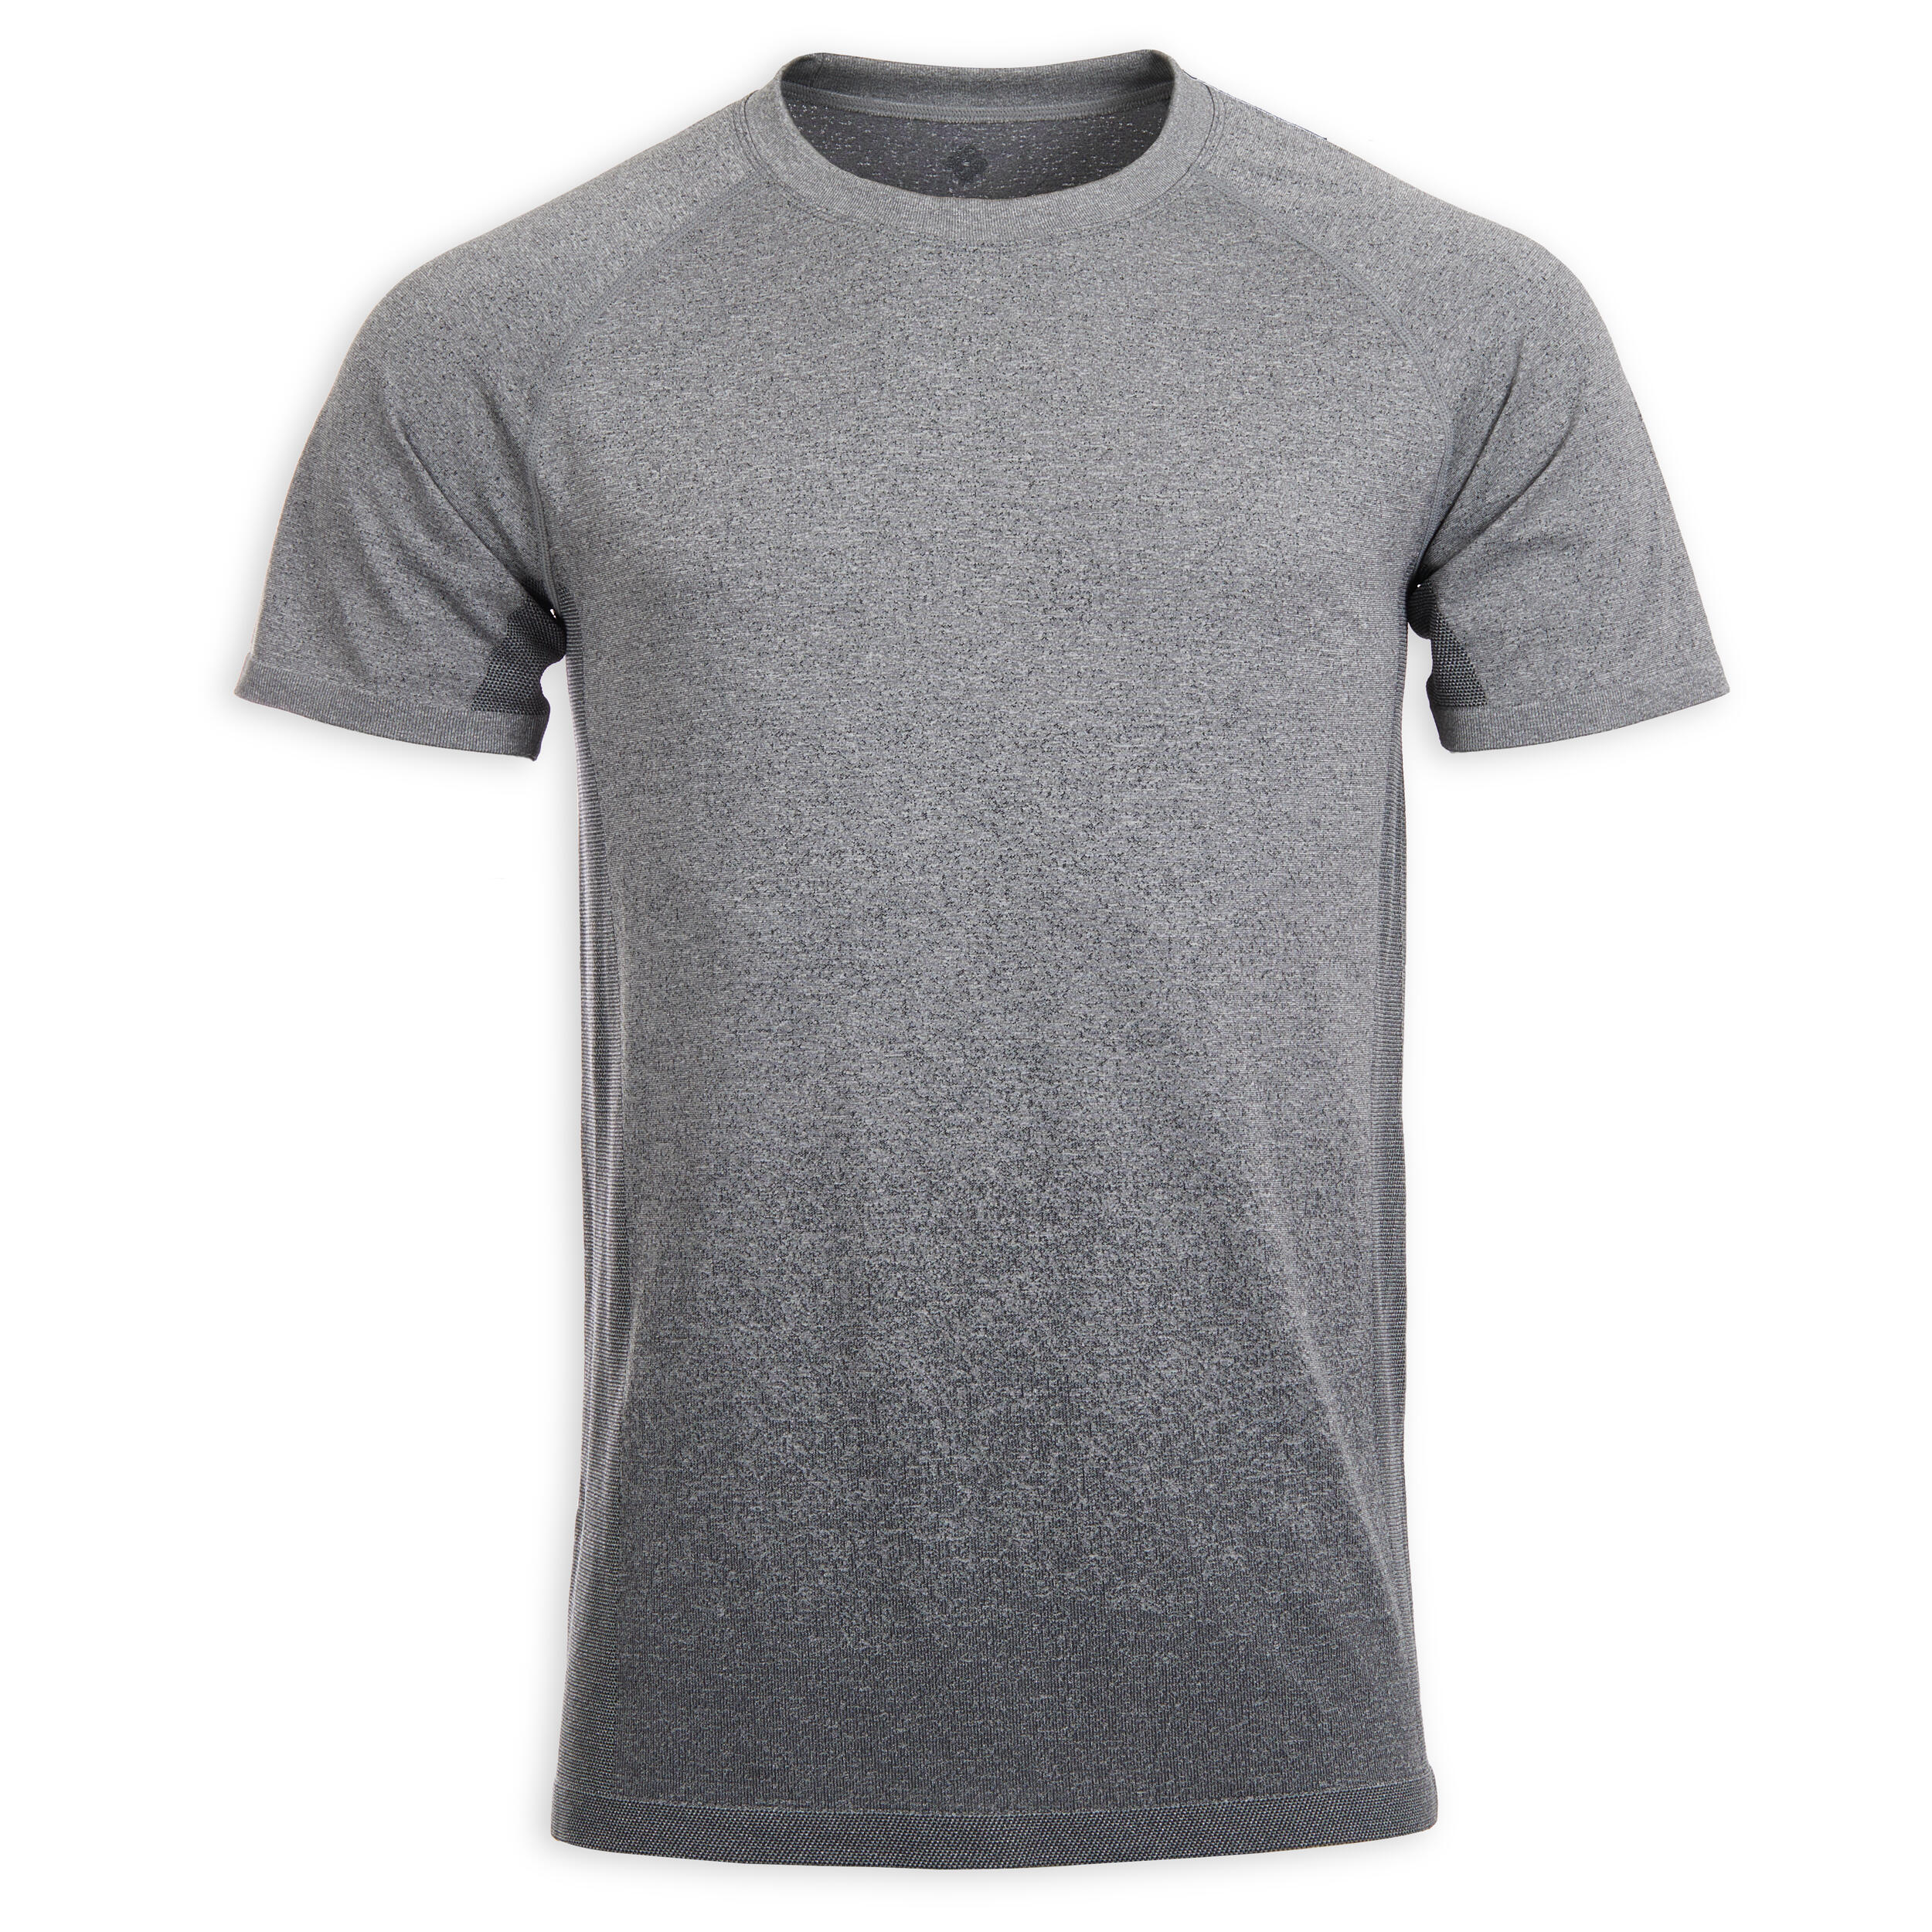 Mens Gym Tops and T-Shirts